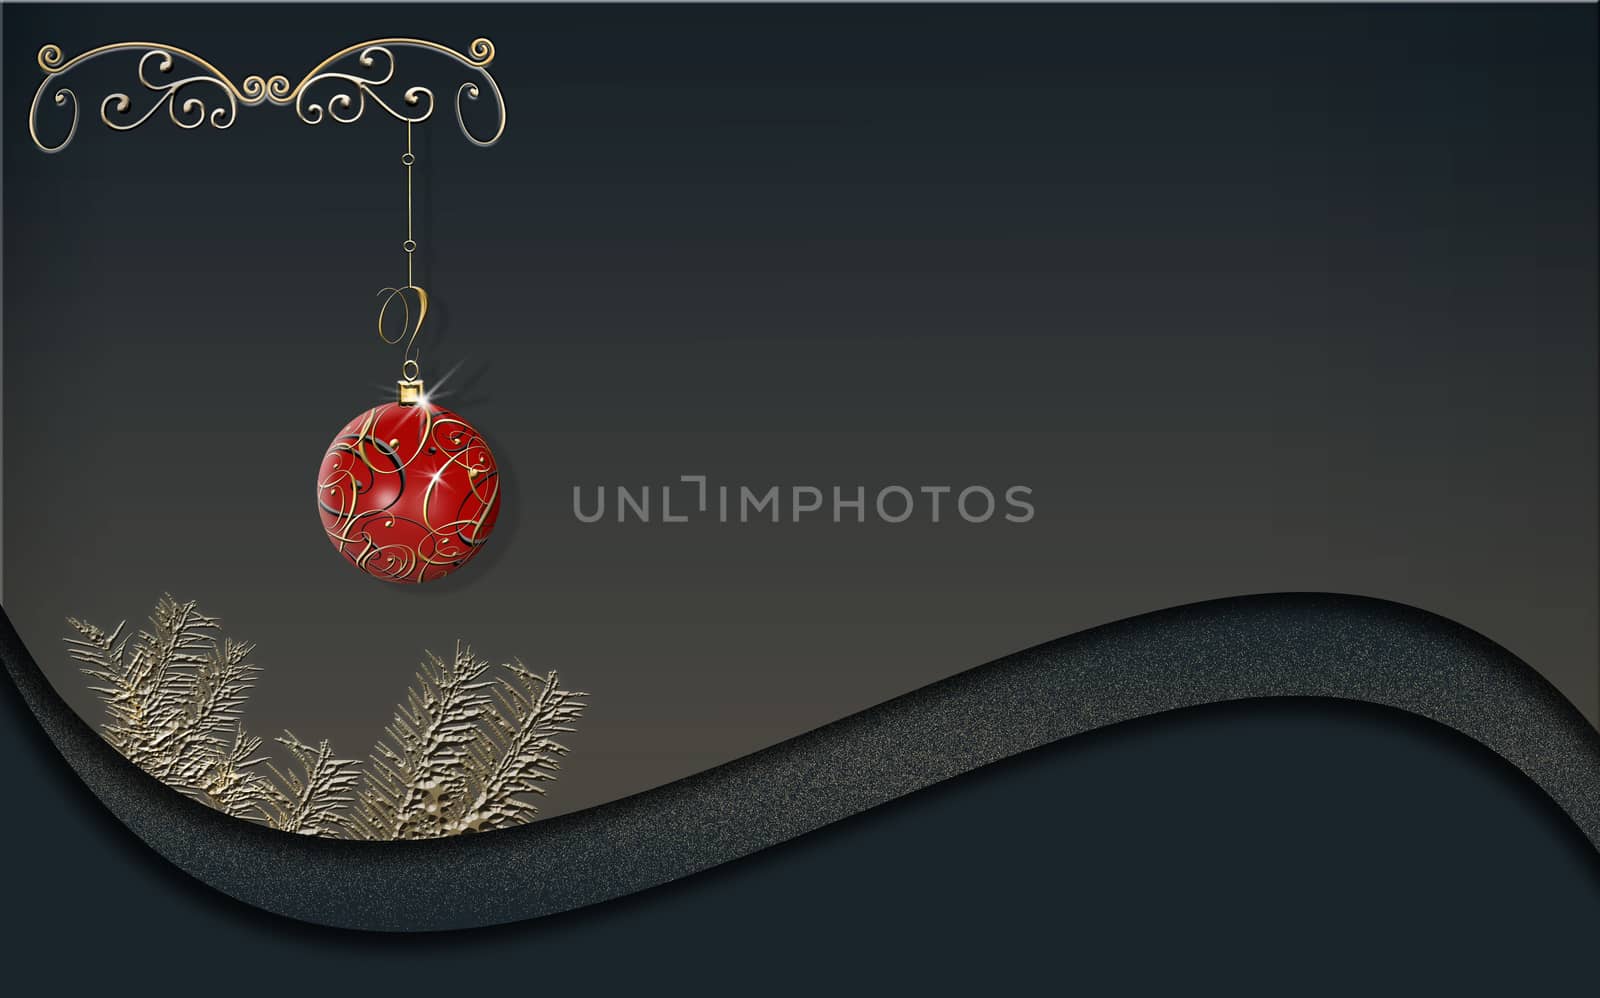 Premium luxury Christmas 2021 New Year background for festive greeting card. Gold fir branches, hanging red gold bauble on black curve background with gold confetti. Horizontal 3D illustration